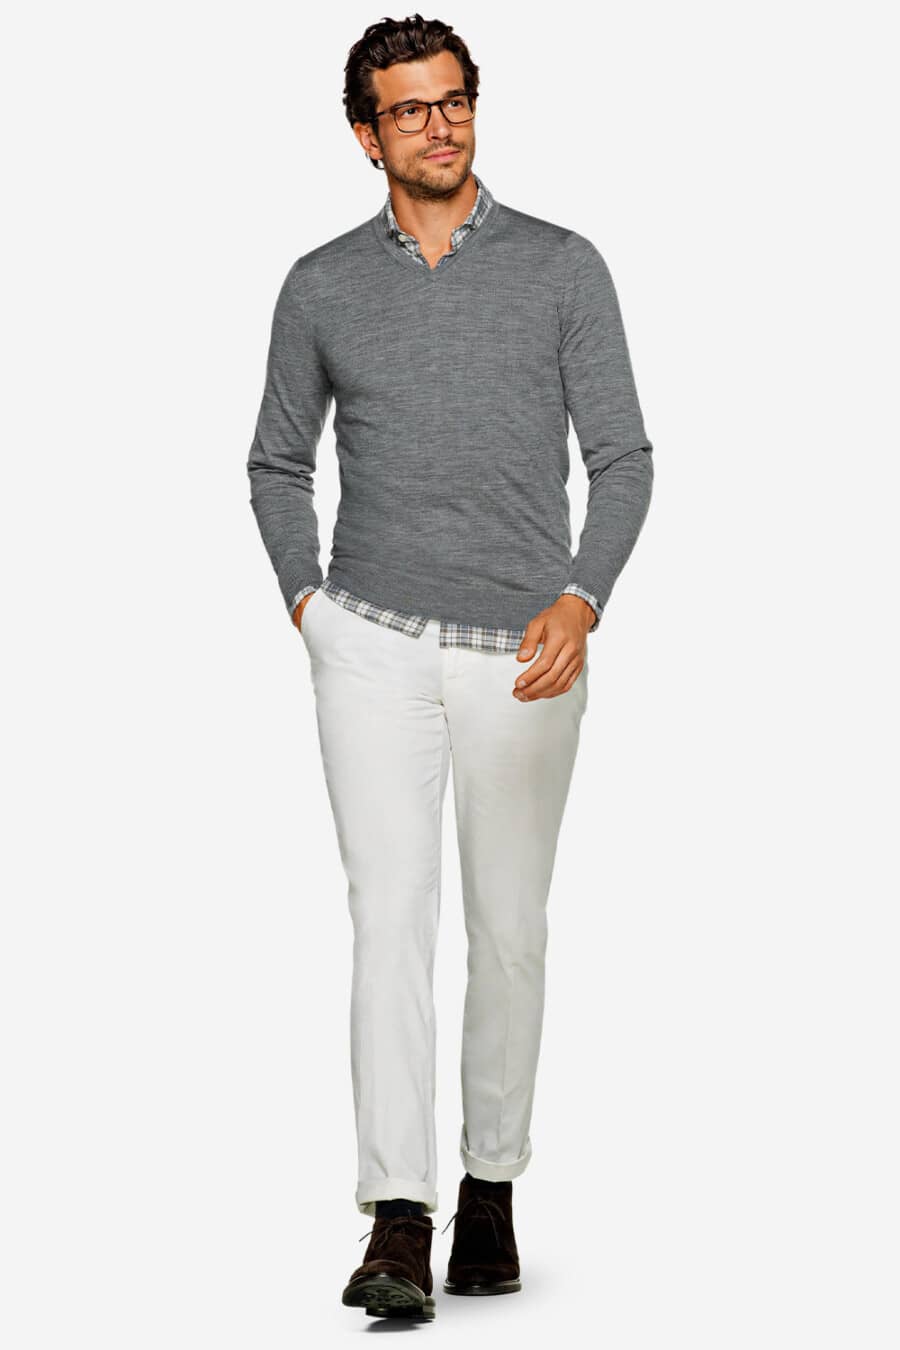 Men's white pants, grey checked shirt, grey merino wool V-neck sweater and brown suede boots outfit